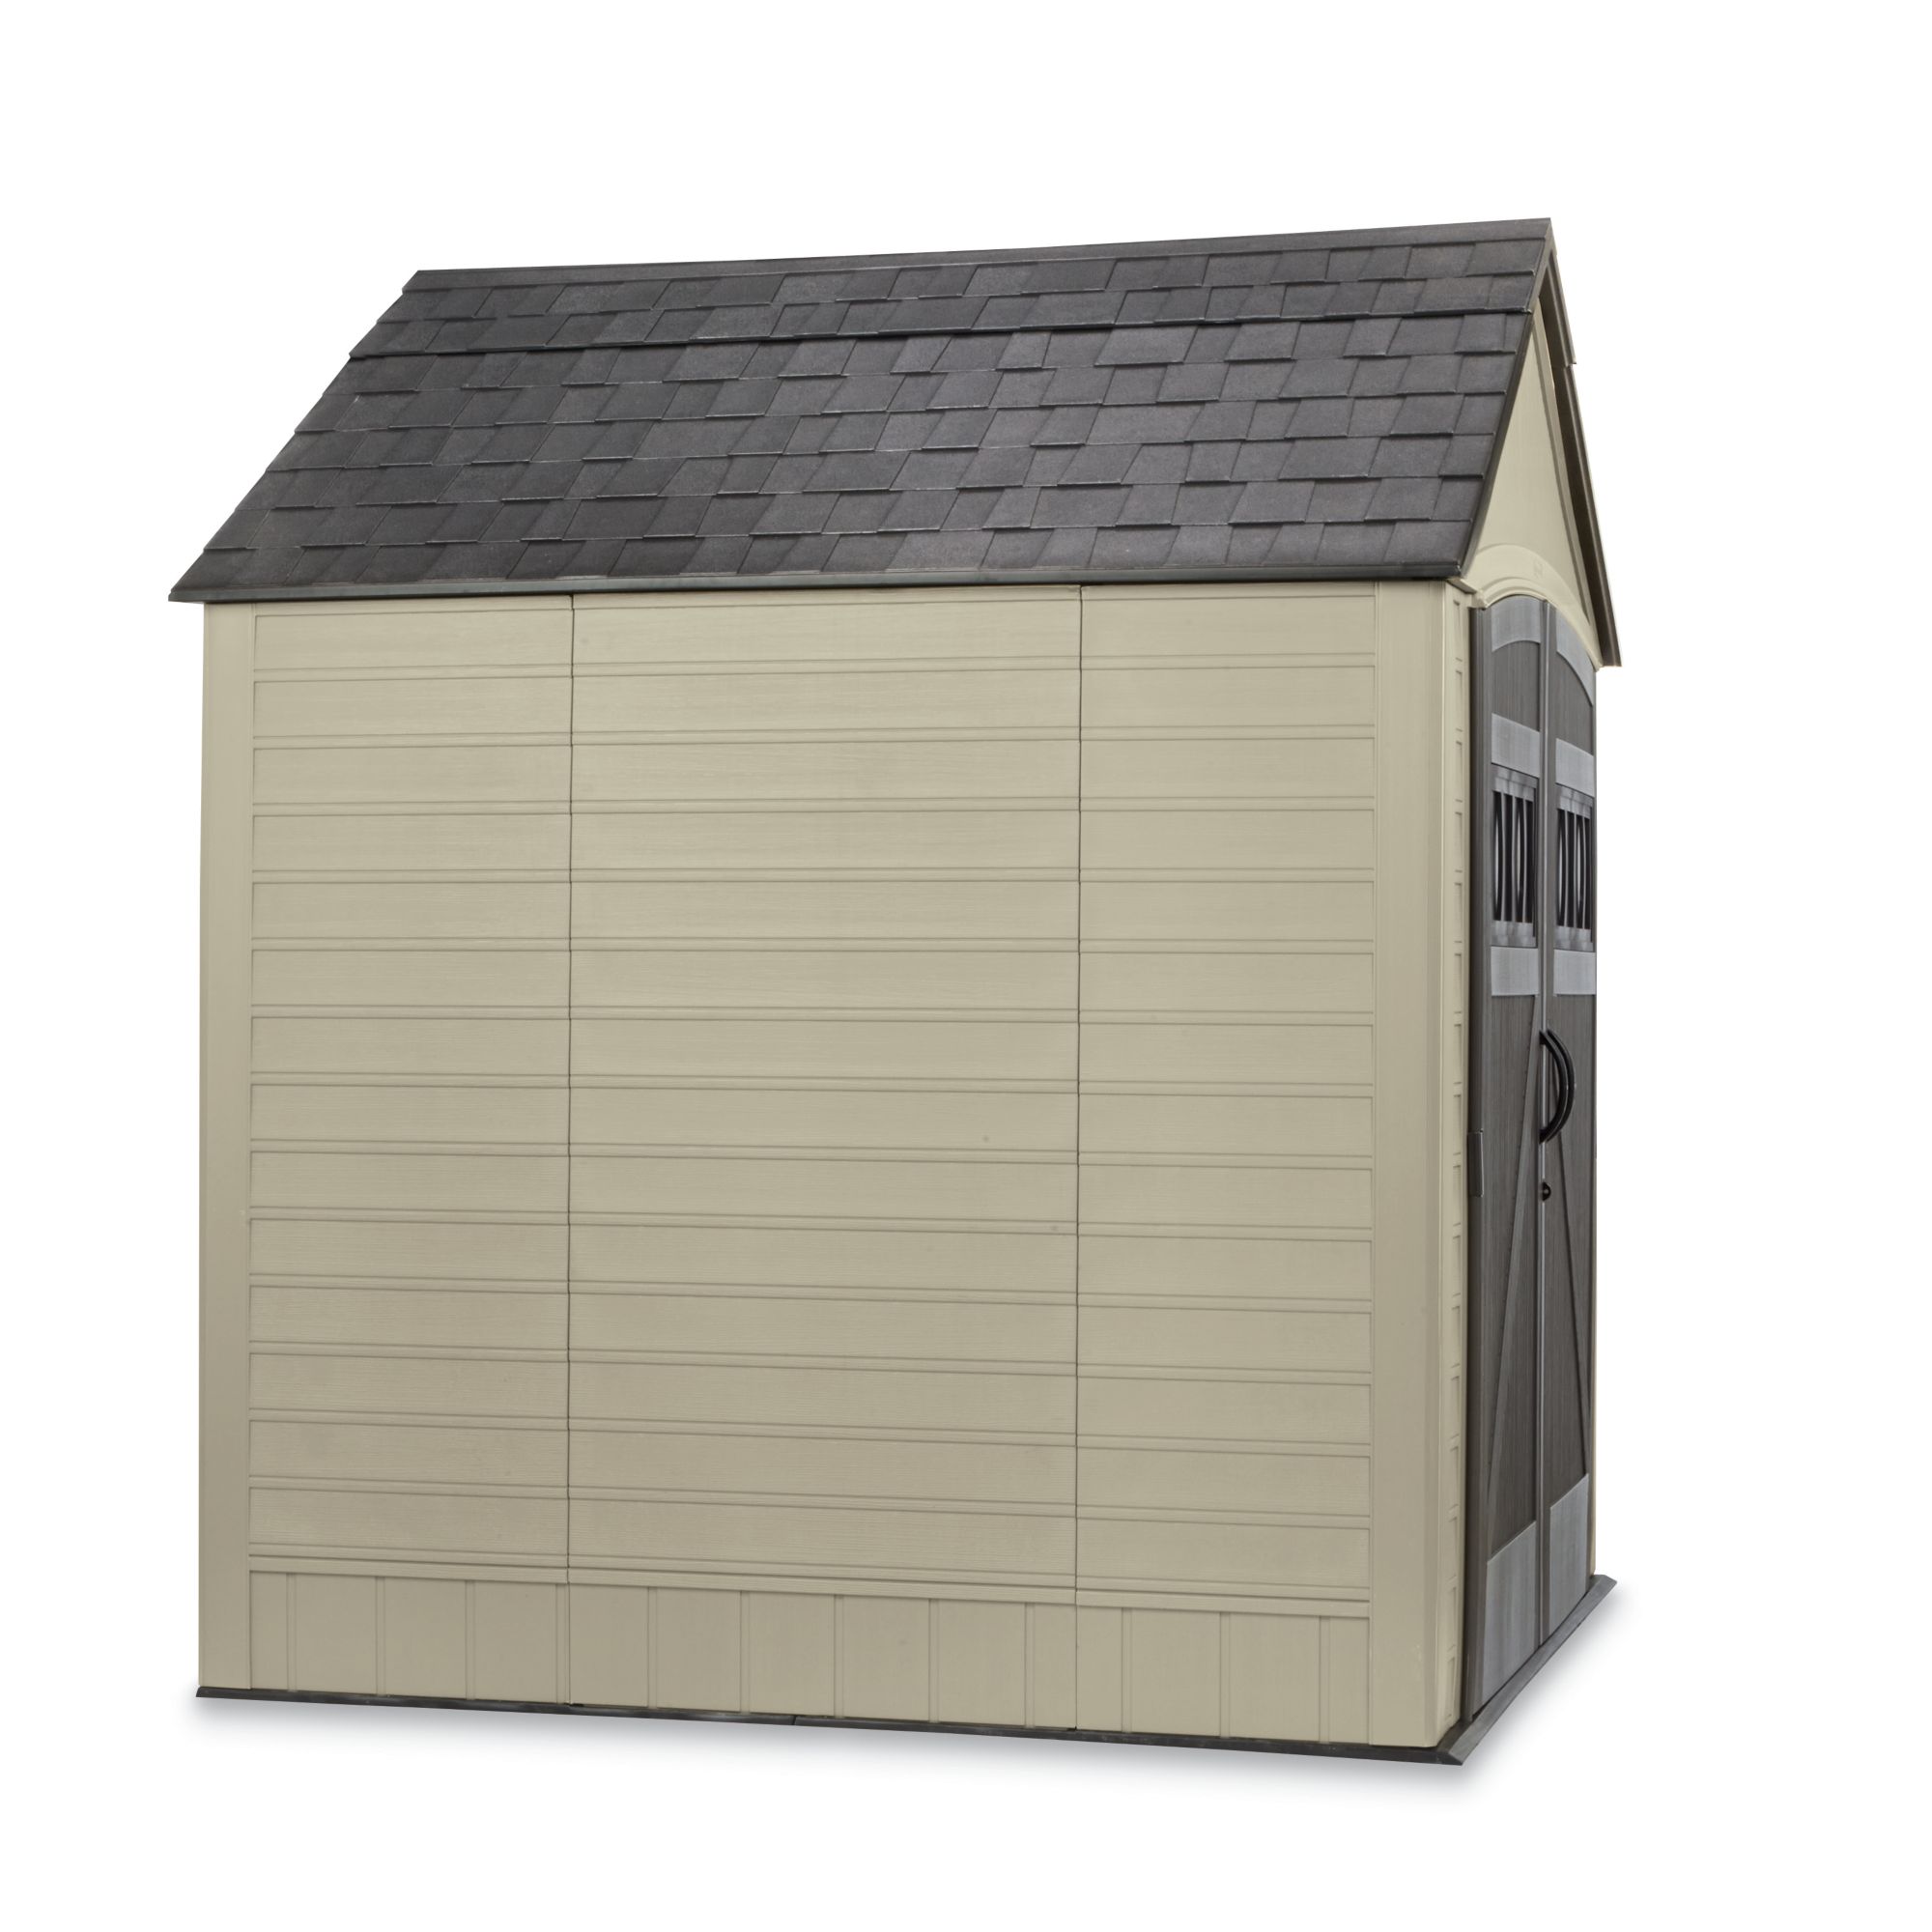 Rubbermaid 7-ft x 7-ft Roughneck Gable Resin Storage Shed (Floor Included)  at